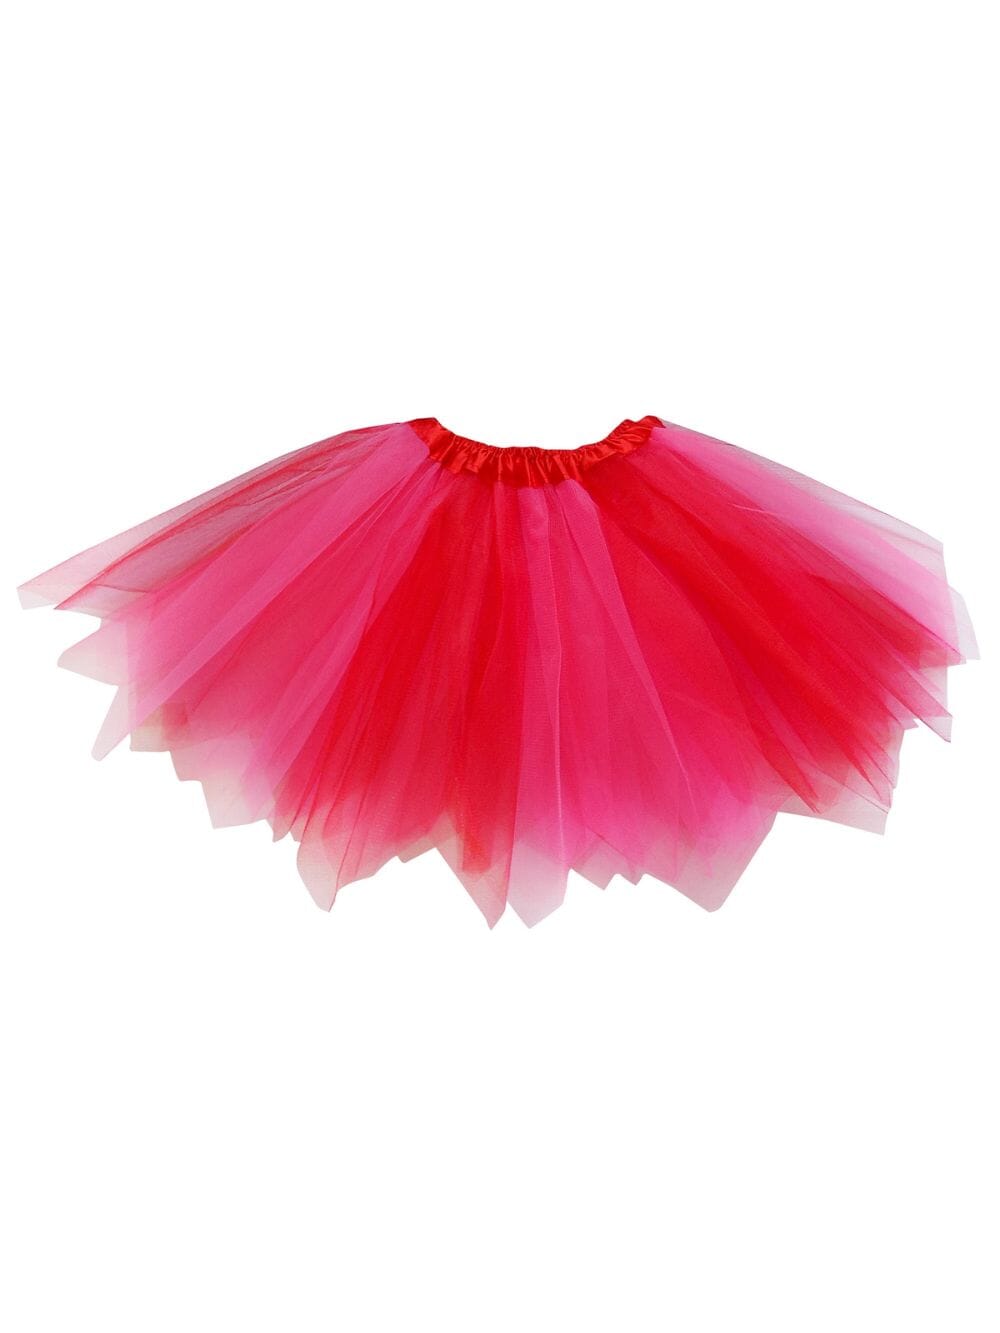 Neon Pink & Red Fairy Costume Pixie Tutu Skirt for Kids, Adults, Plus - Sydney So Sweet